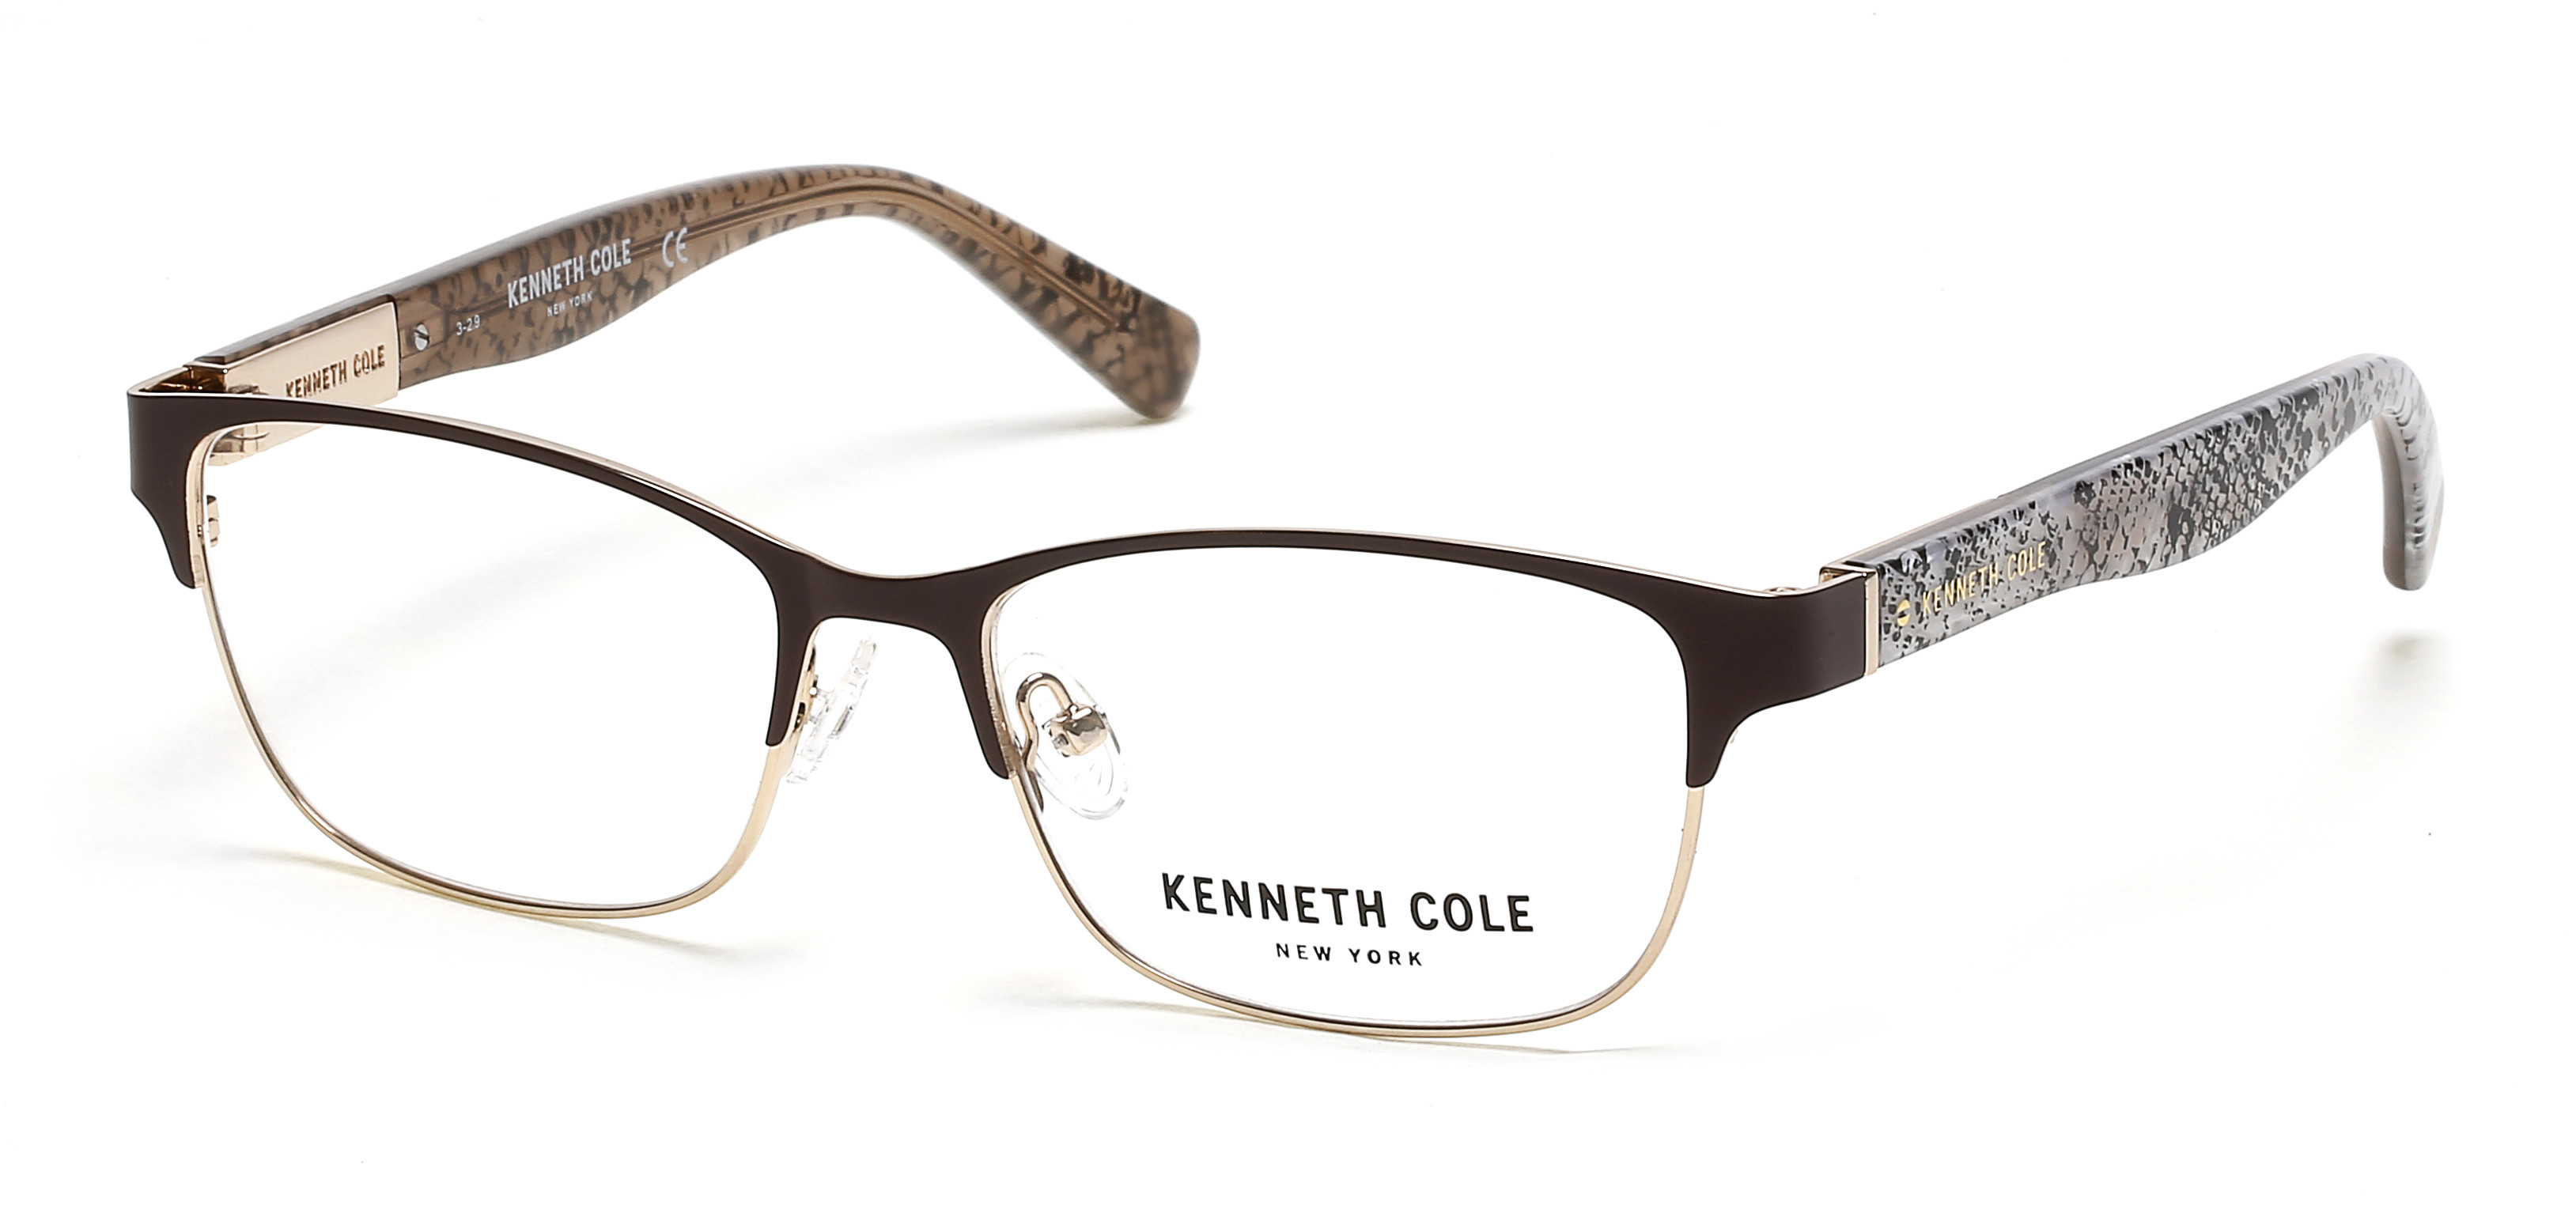 KENNETH COLE NY 0317 046